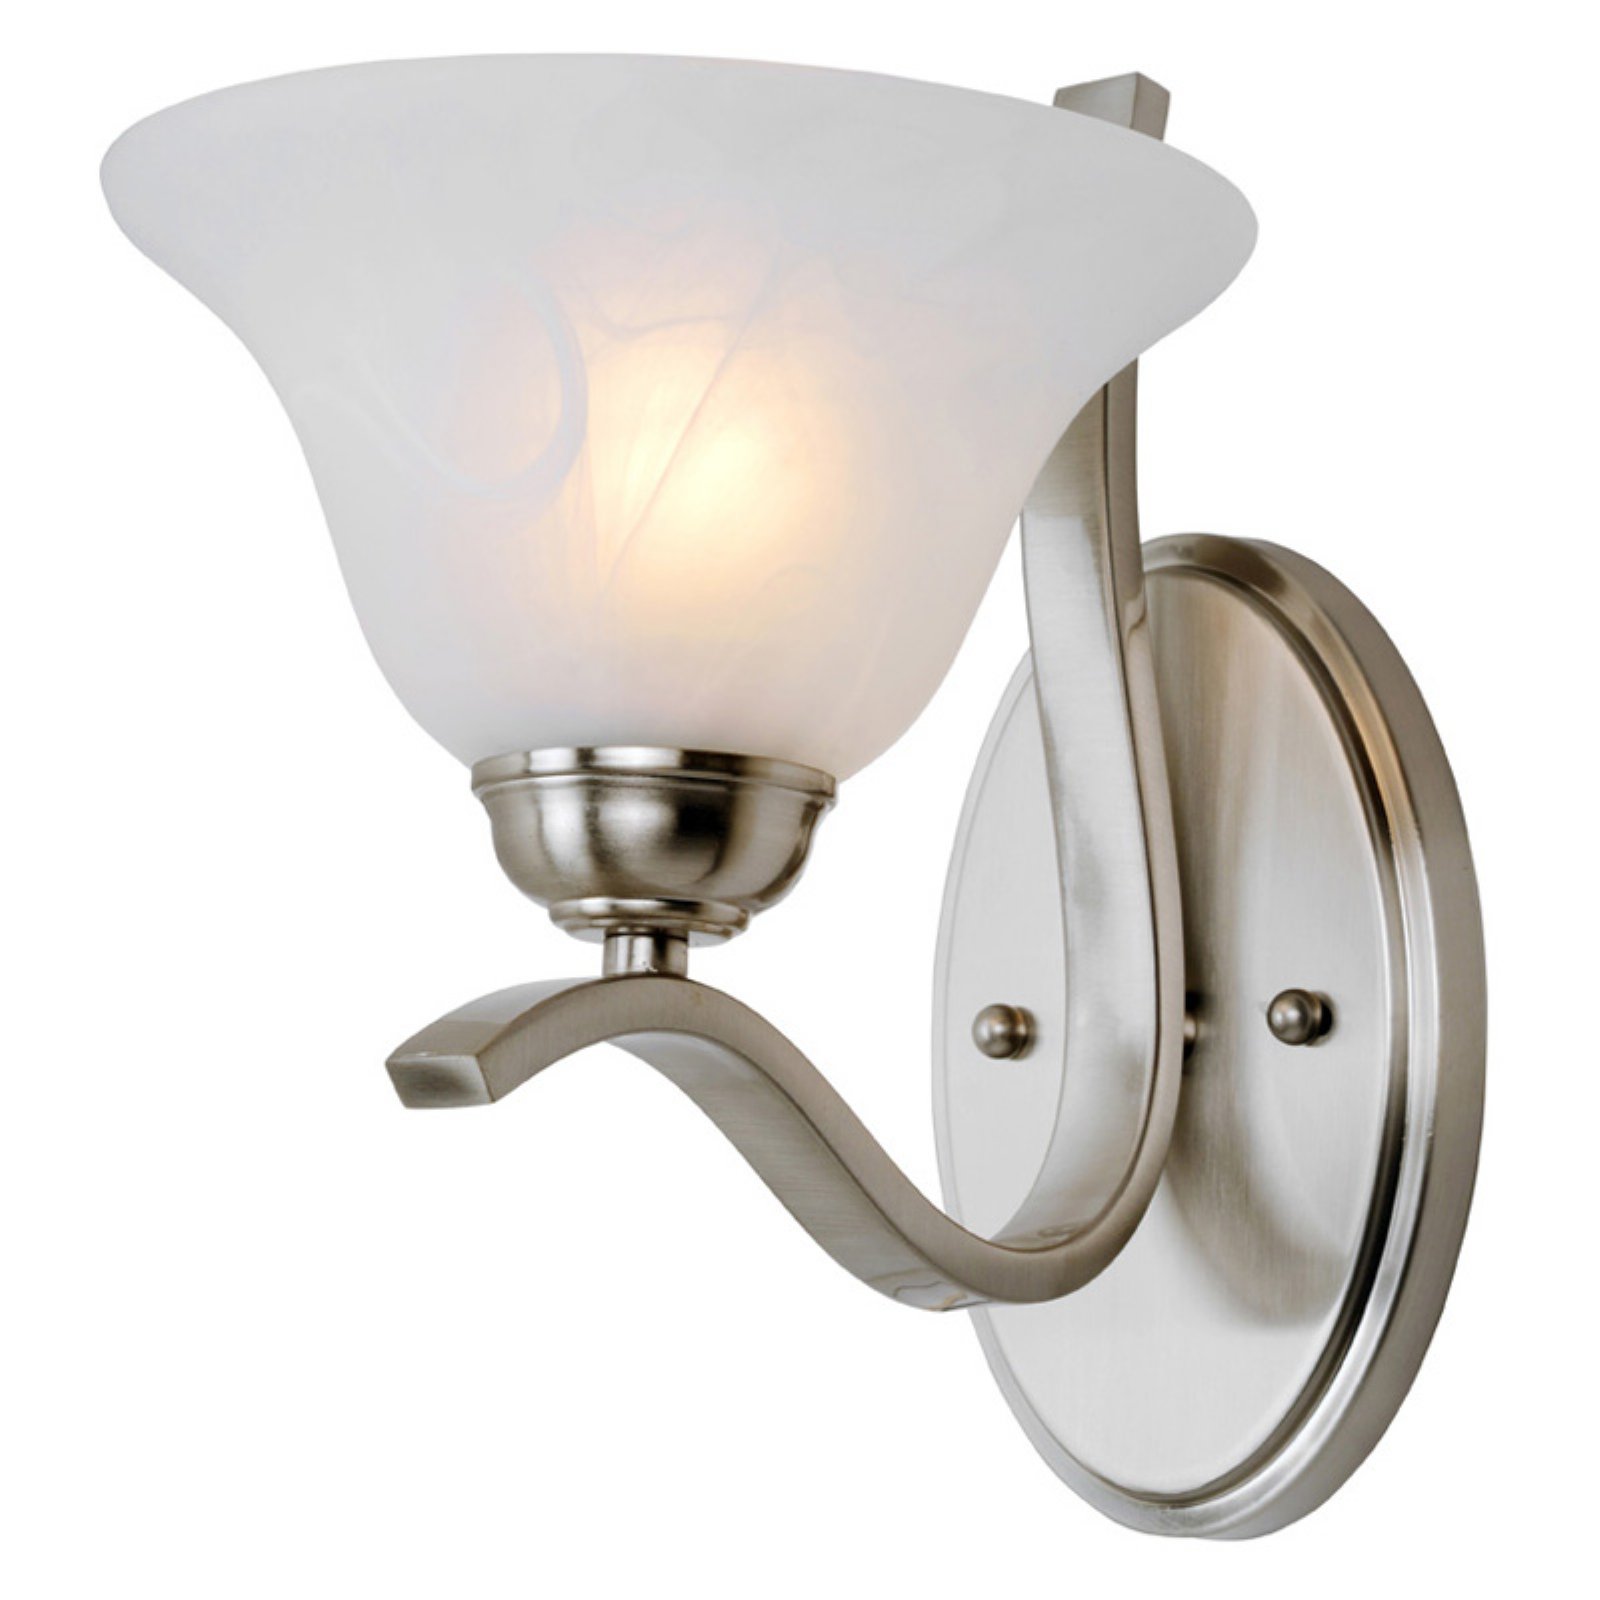 2825 BN-Trans Globe Lighting-One Light Wall Sconce-Brushed Nickel Finish - image 1 of 2